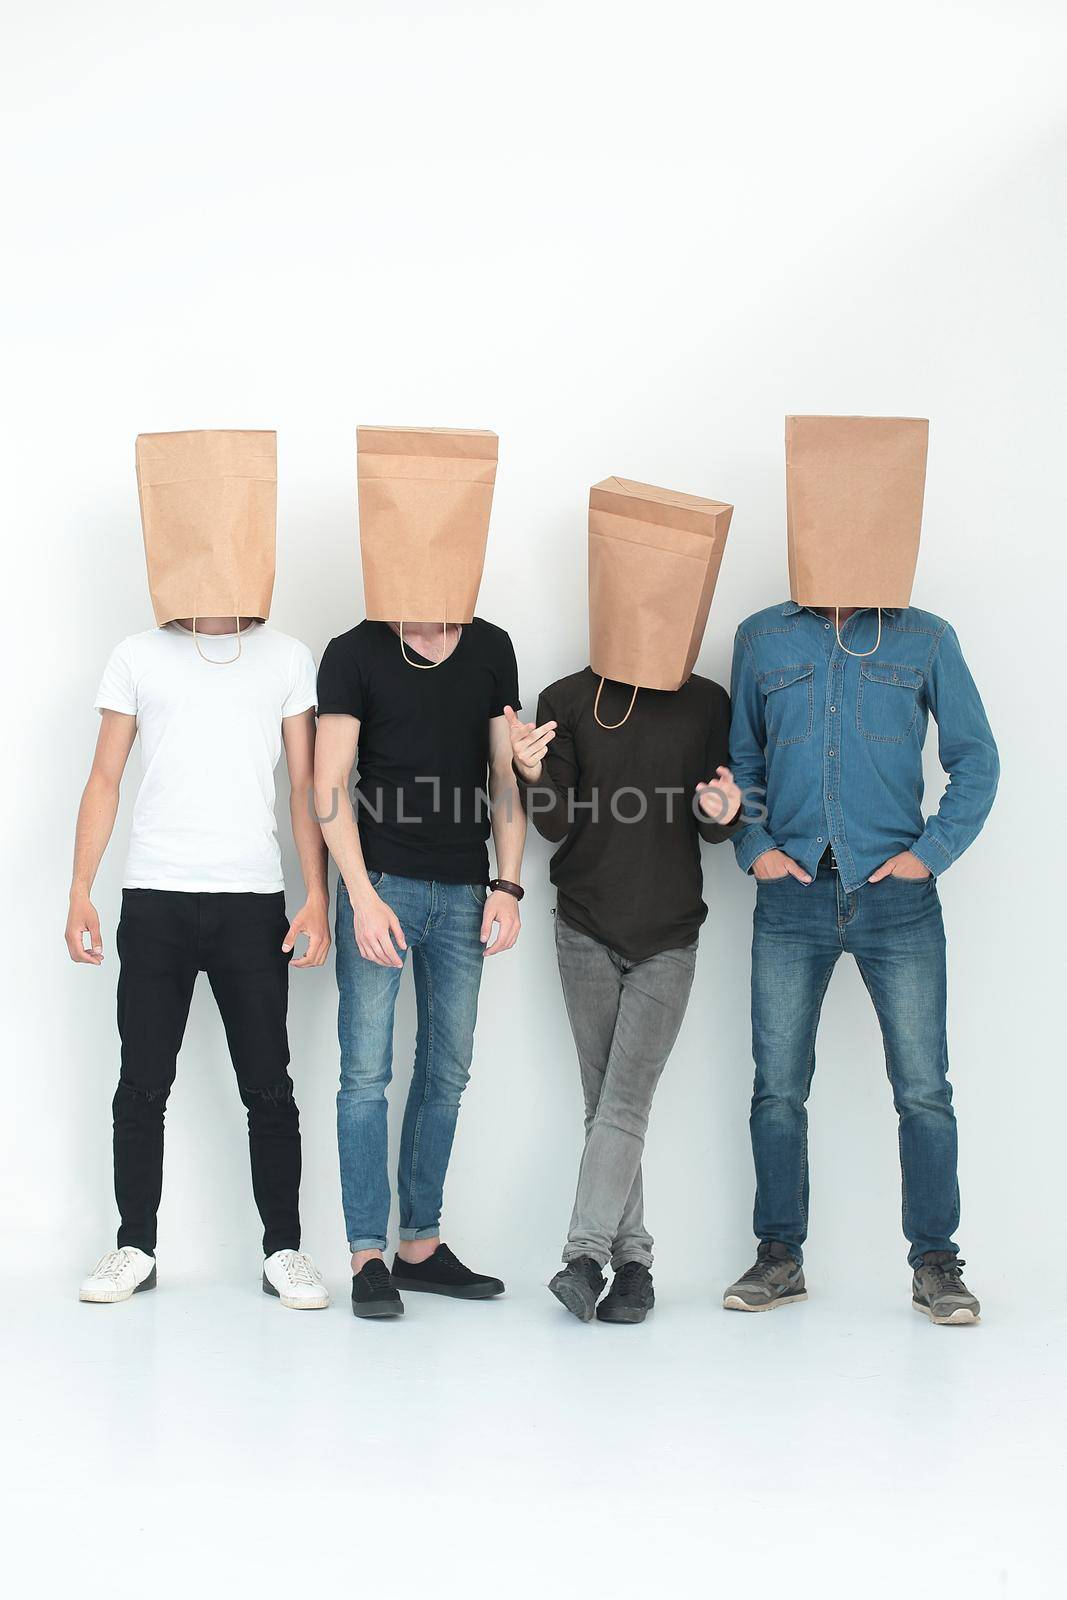 in full growth. a group of men with paper bags on their heads.photo with copy space